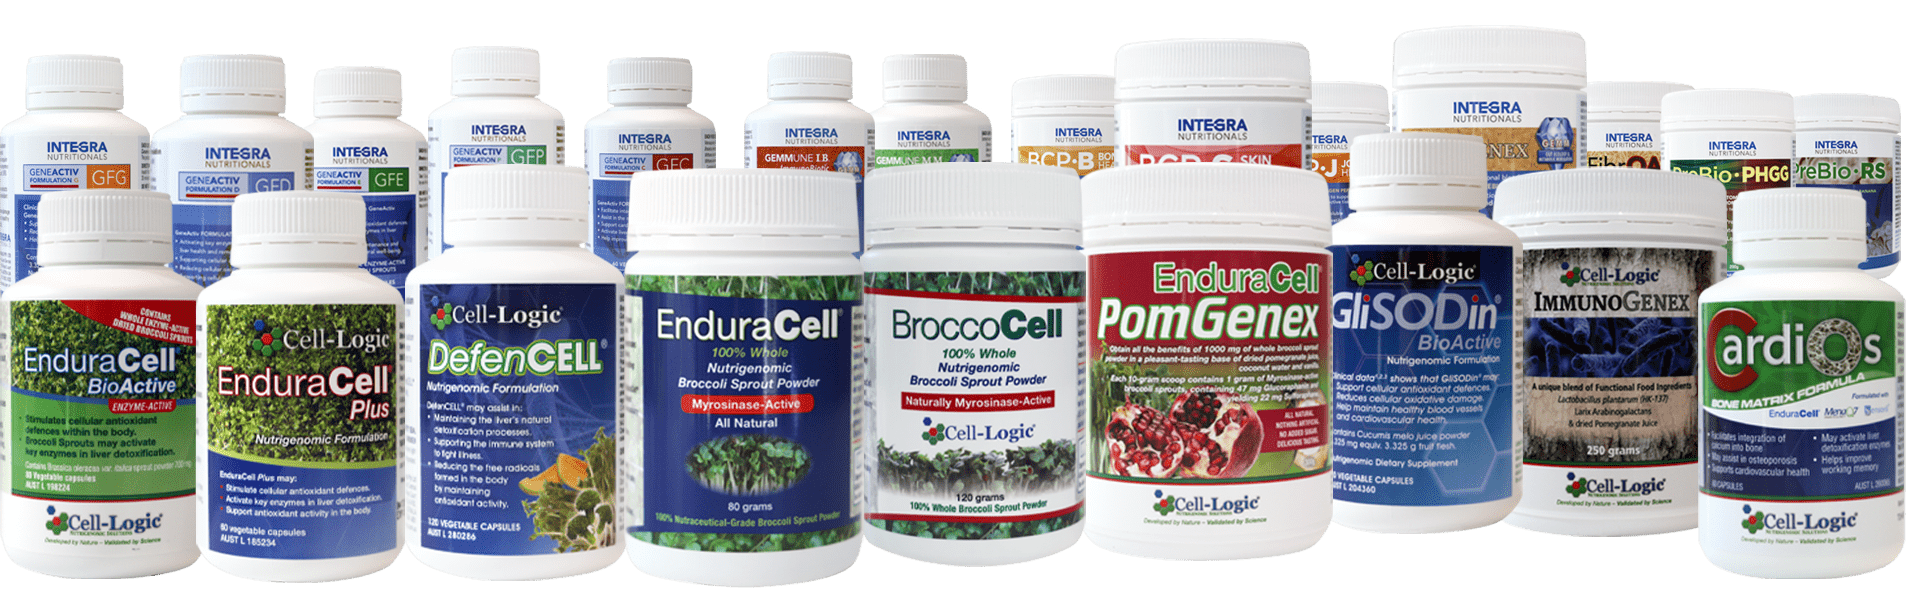 Cell-Logic and Integra Nutrititionals product range